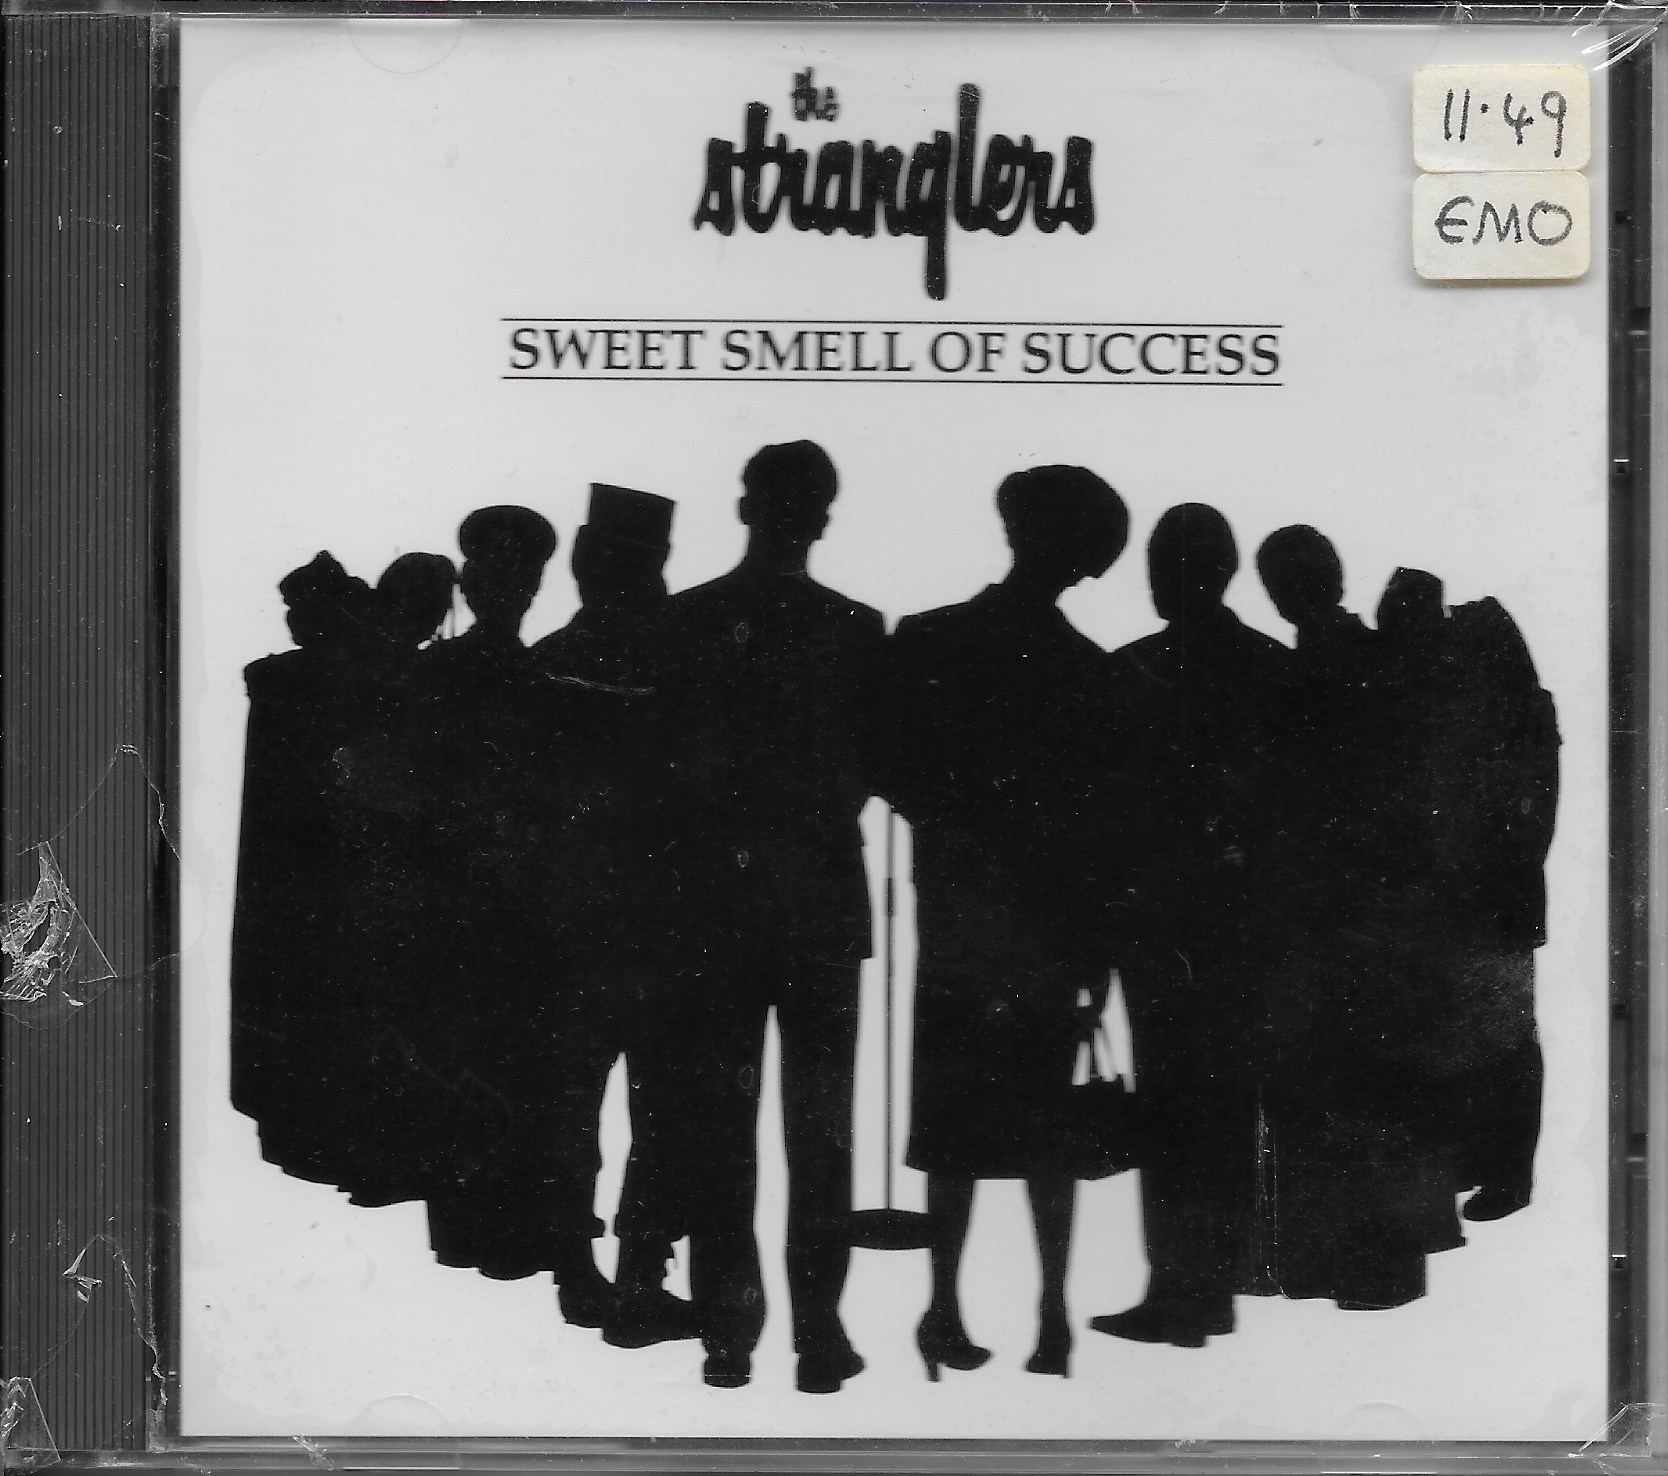 Picture of ESK 2067 Sweet smell of success by artist The Stranglers